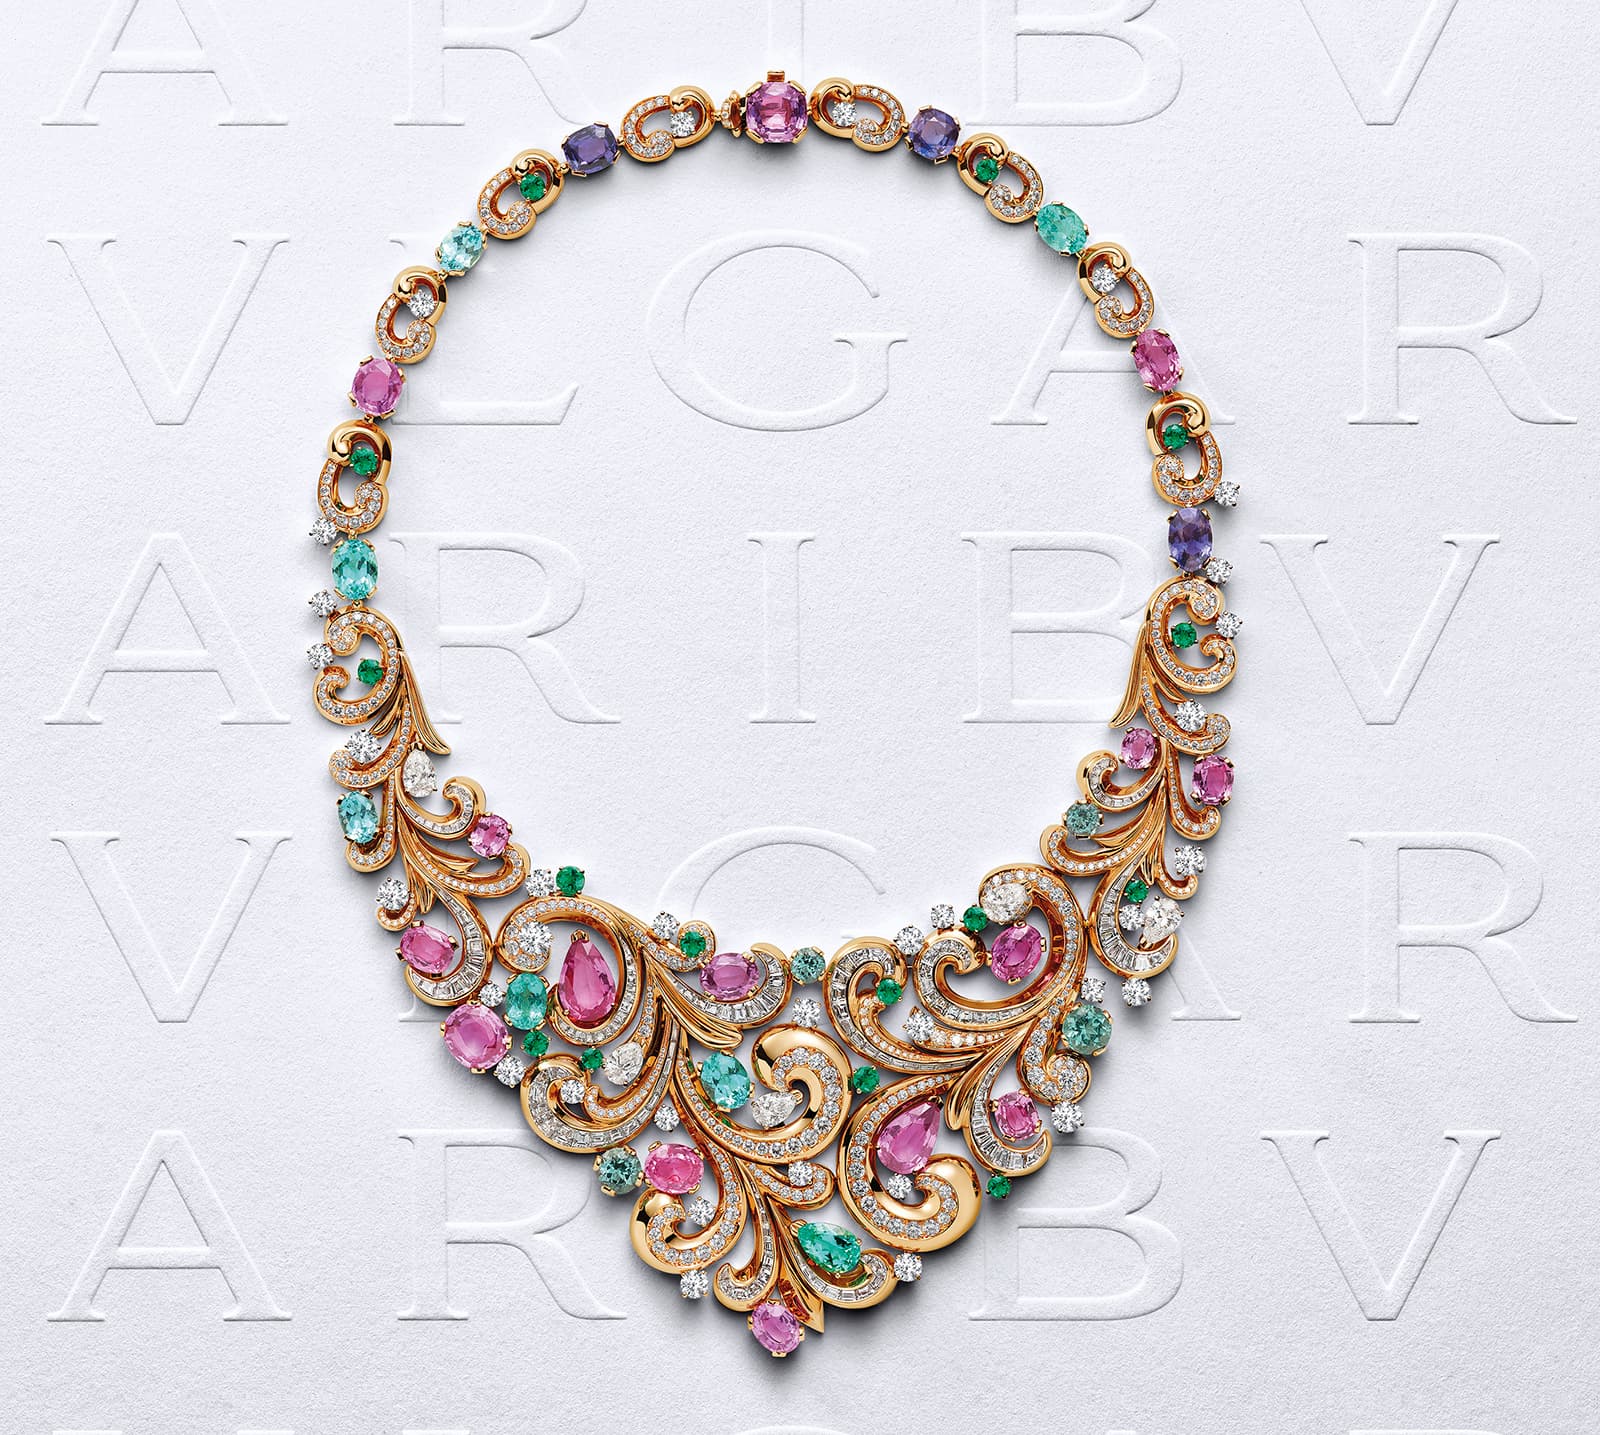 Bvlgari Borocko Lady Arabesque high jewellery necklace, set with sapphires, Paraiba tourmalines, emeralds and diamonds in 18 carat rose gold